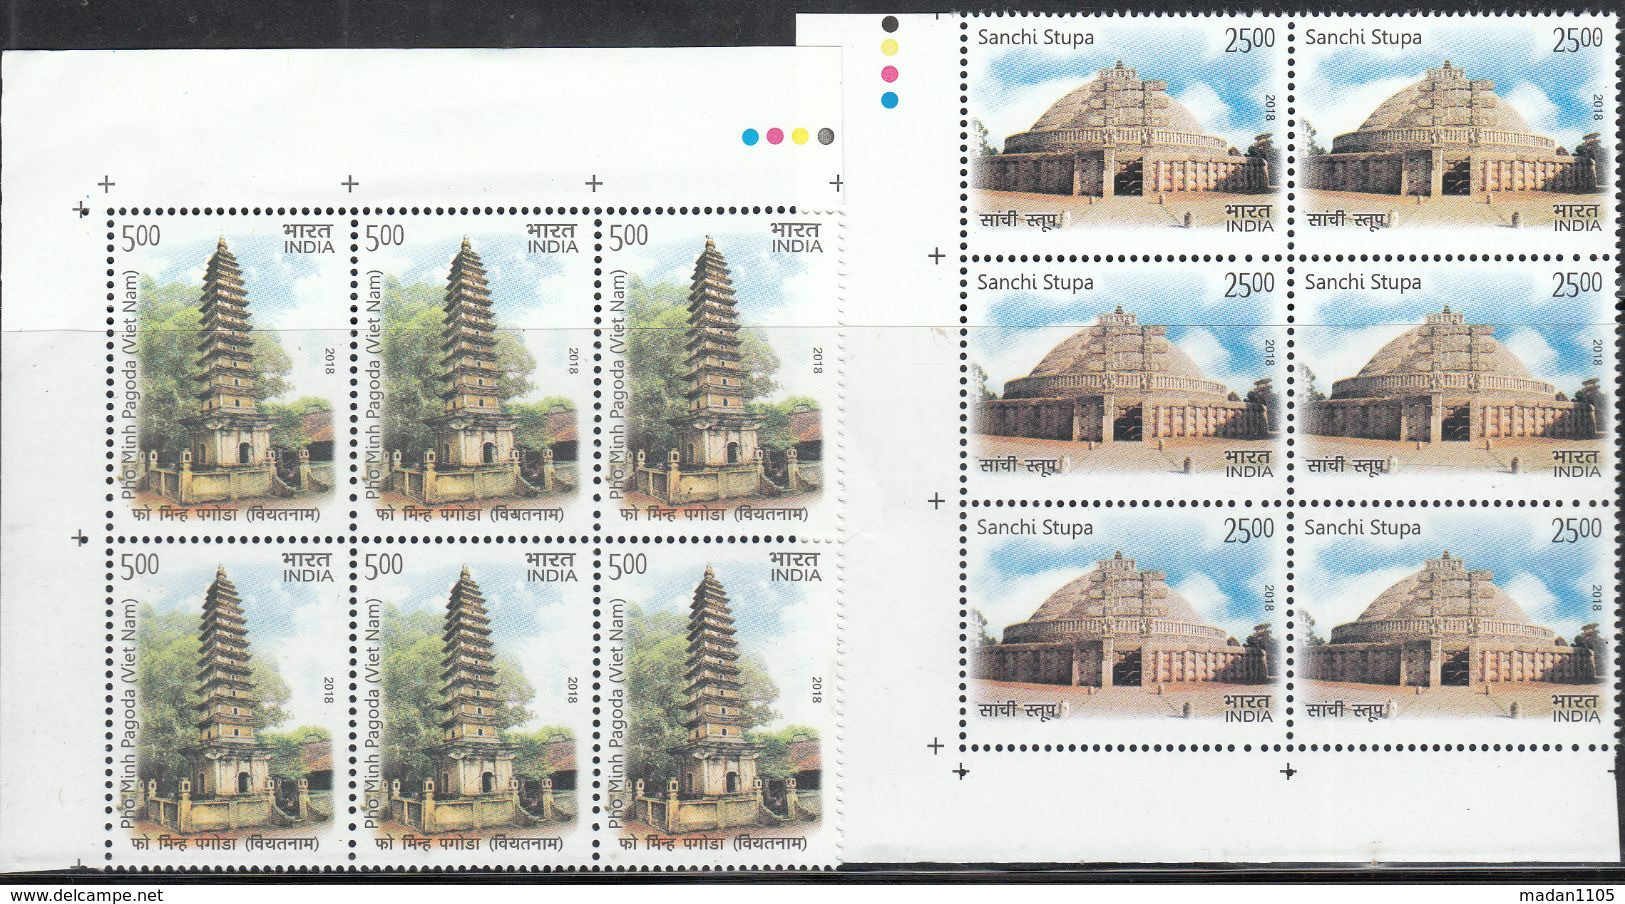 INDIA, 2018, INDO VIETNAM Joint Issue, Block Of 6 With Traffic Lights, MNH, (**) - Oblitérés